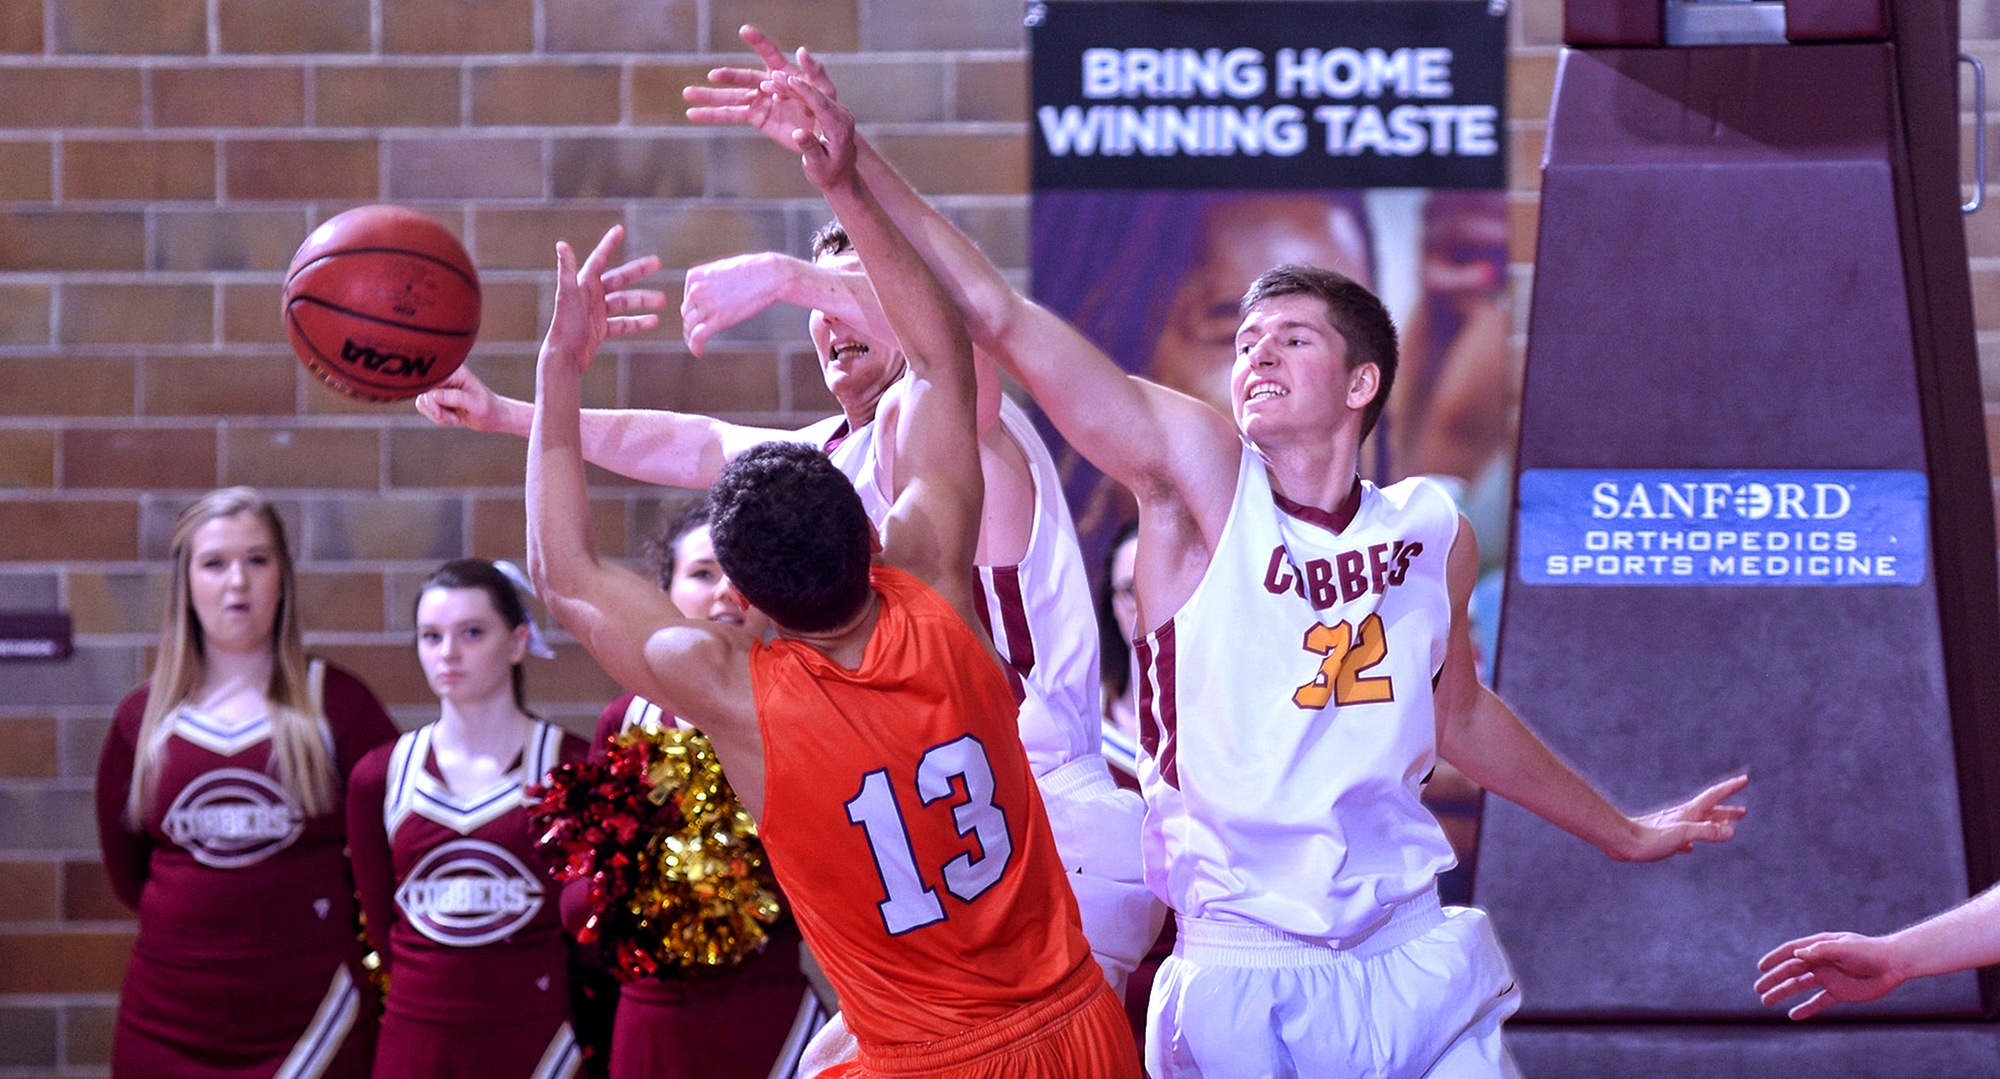 Senior John Reiten (#32) had three blocks and helped Concordia's defense stop Macalester down the stretch in a 66-65 win.